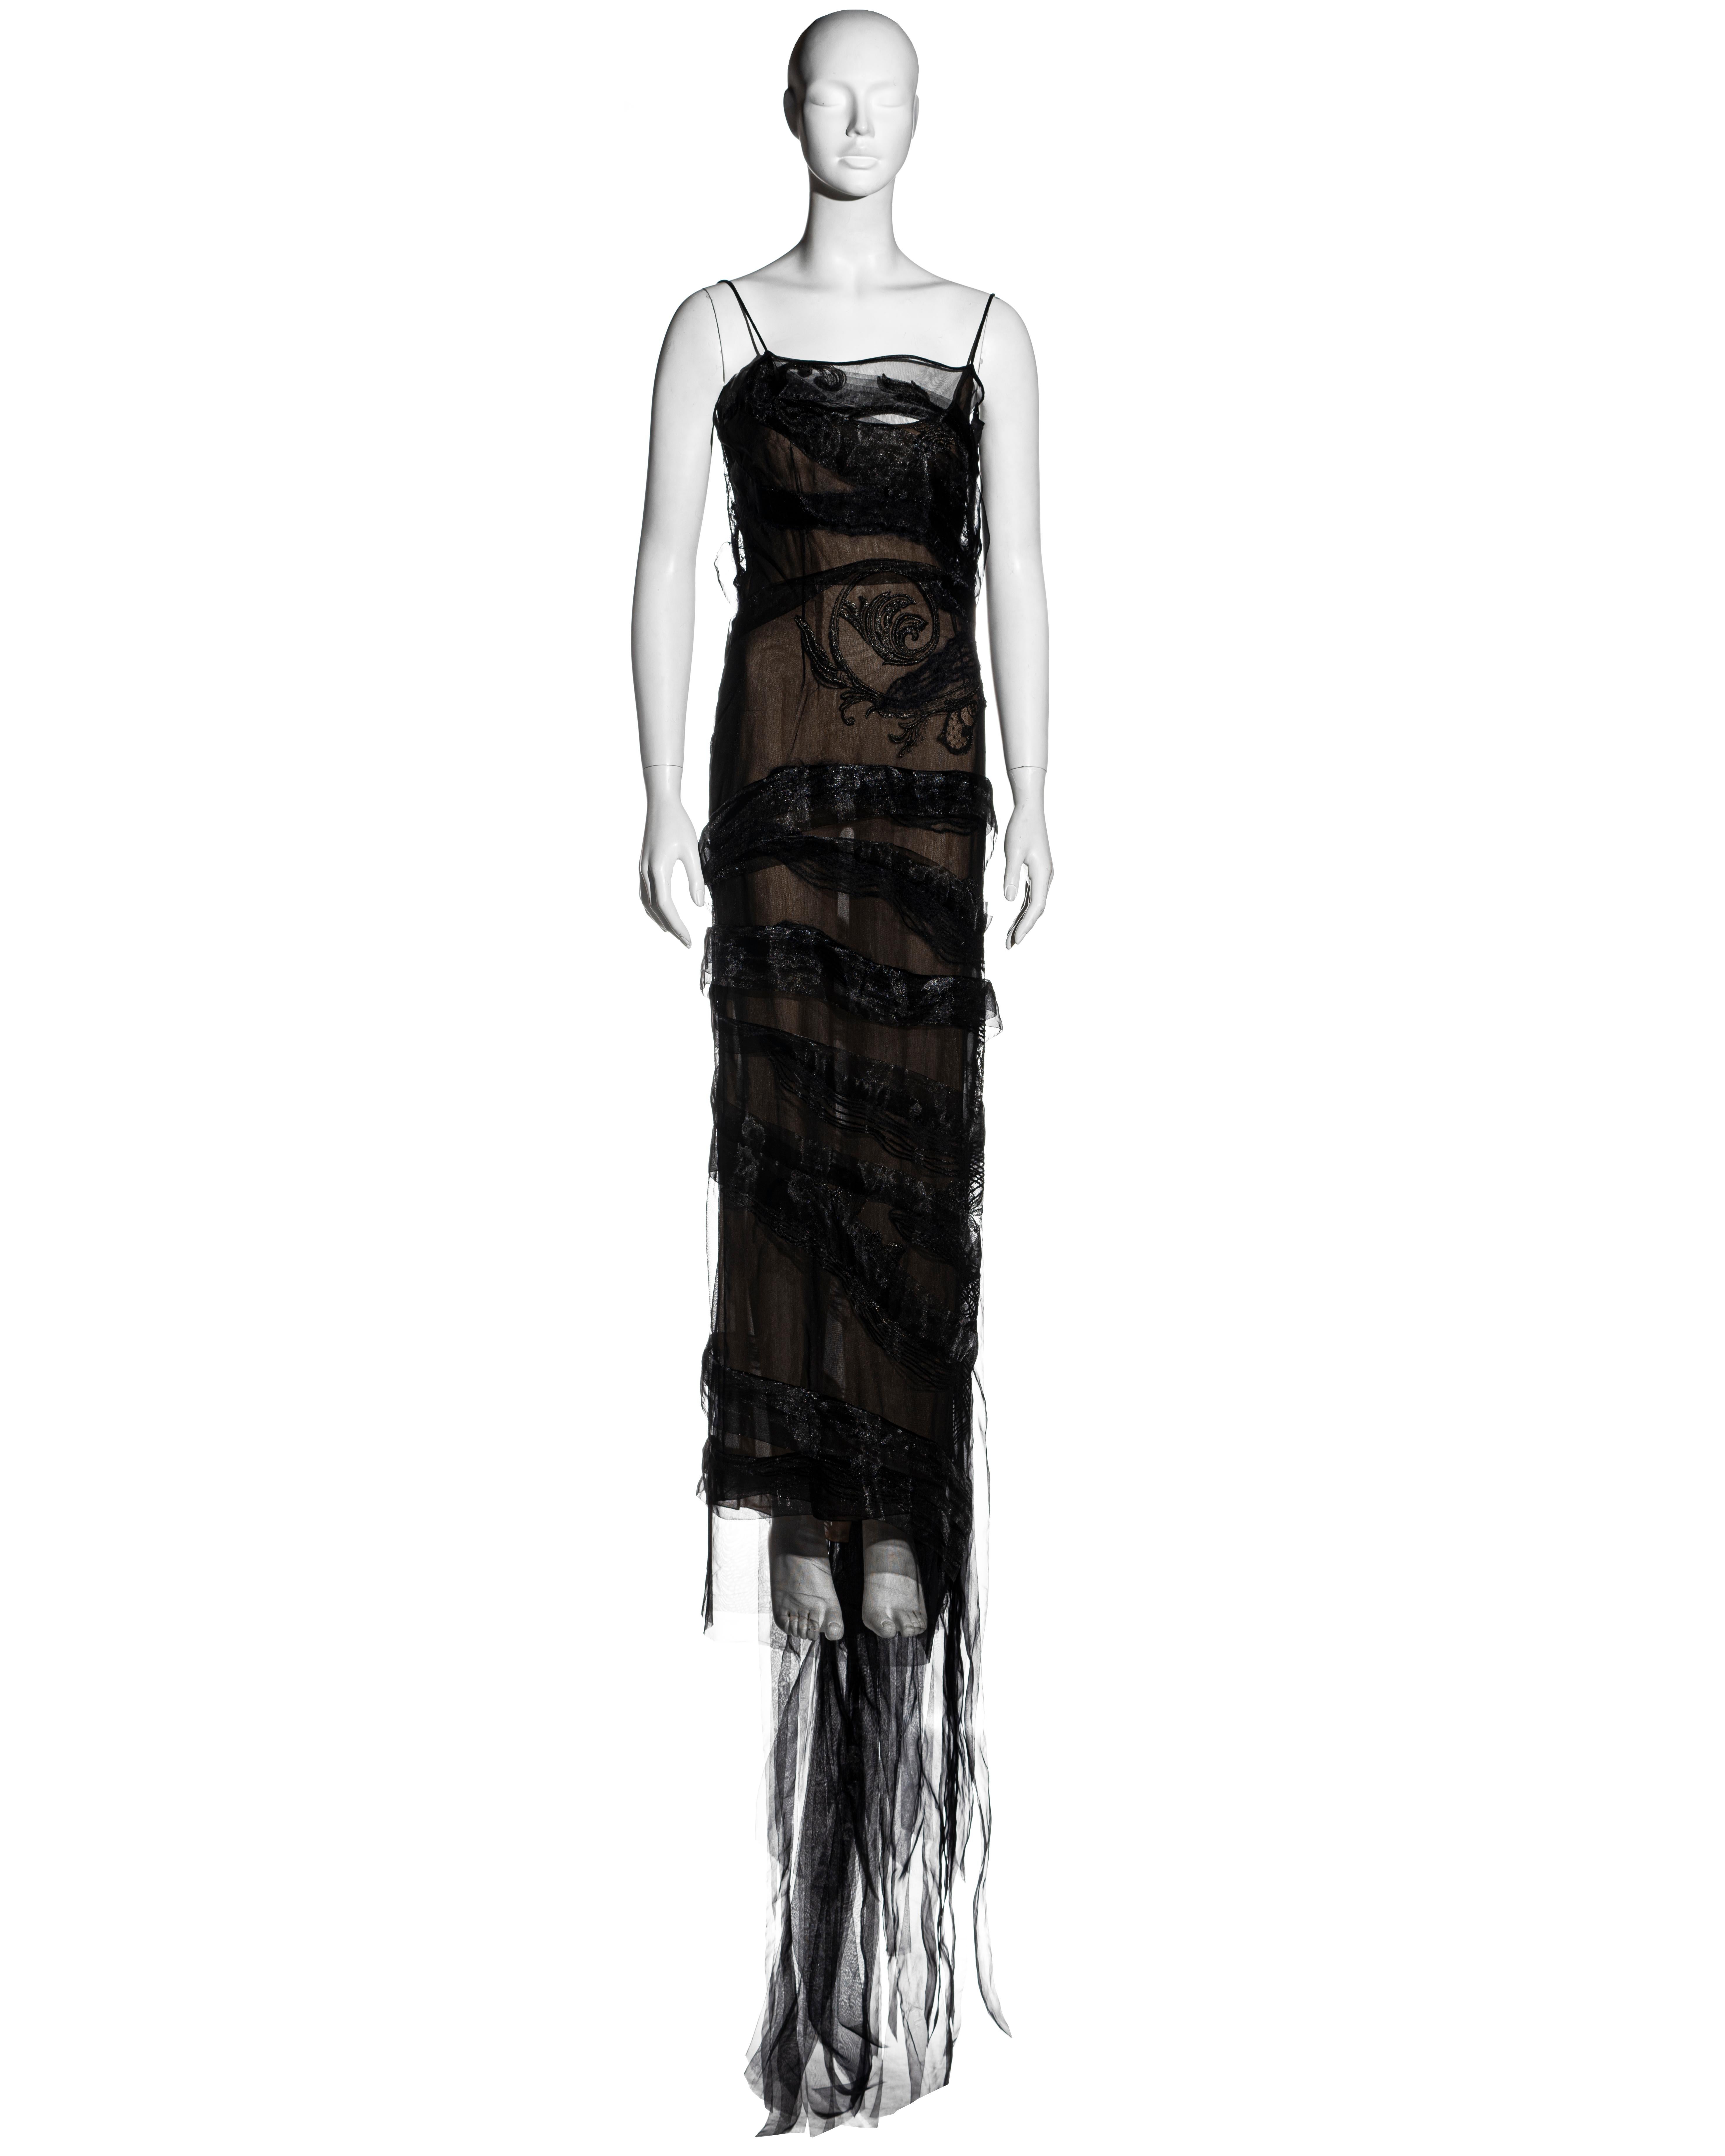 ▪ Gianfranco Ferre black silk organza evening dress
▪ Multiple strips of organza wrap around the dress finishing at the back as a long train 
▪ Spaghetti straps 
▪ Asymmetric neckline 
▪ Embroidered designs on the bodice 
▪ Lace trim at the back
▪